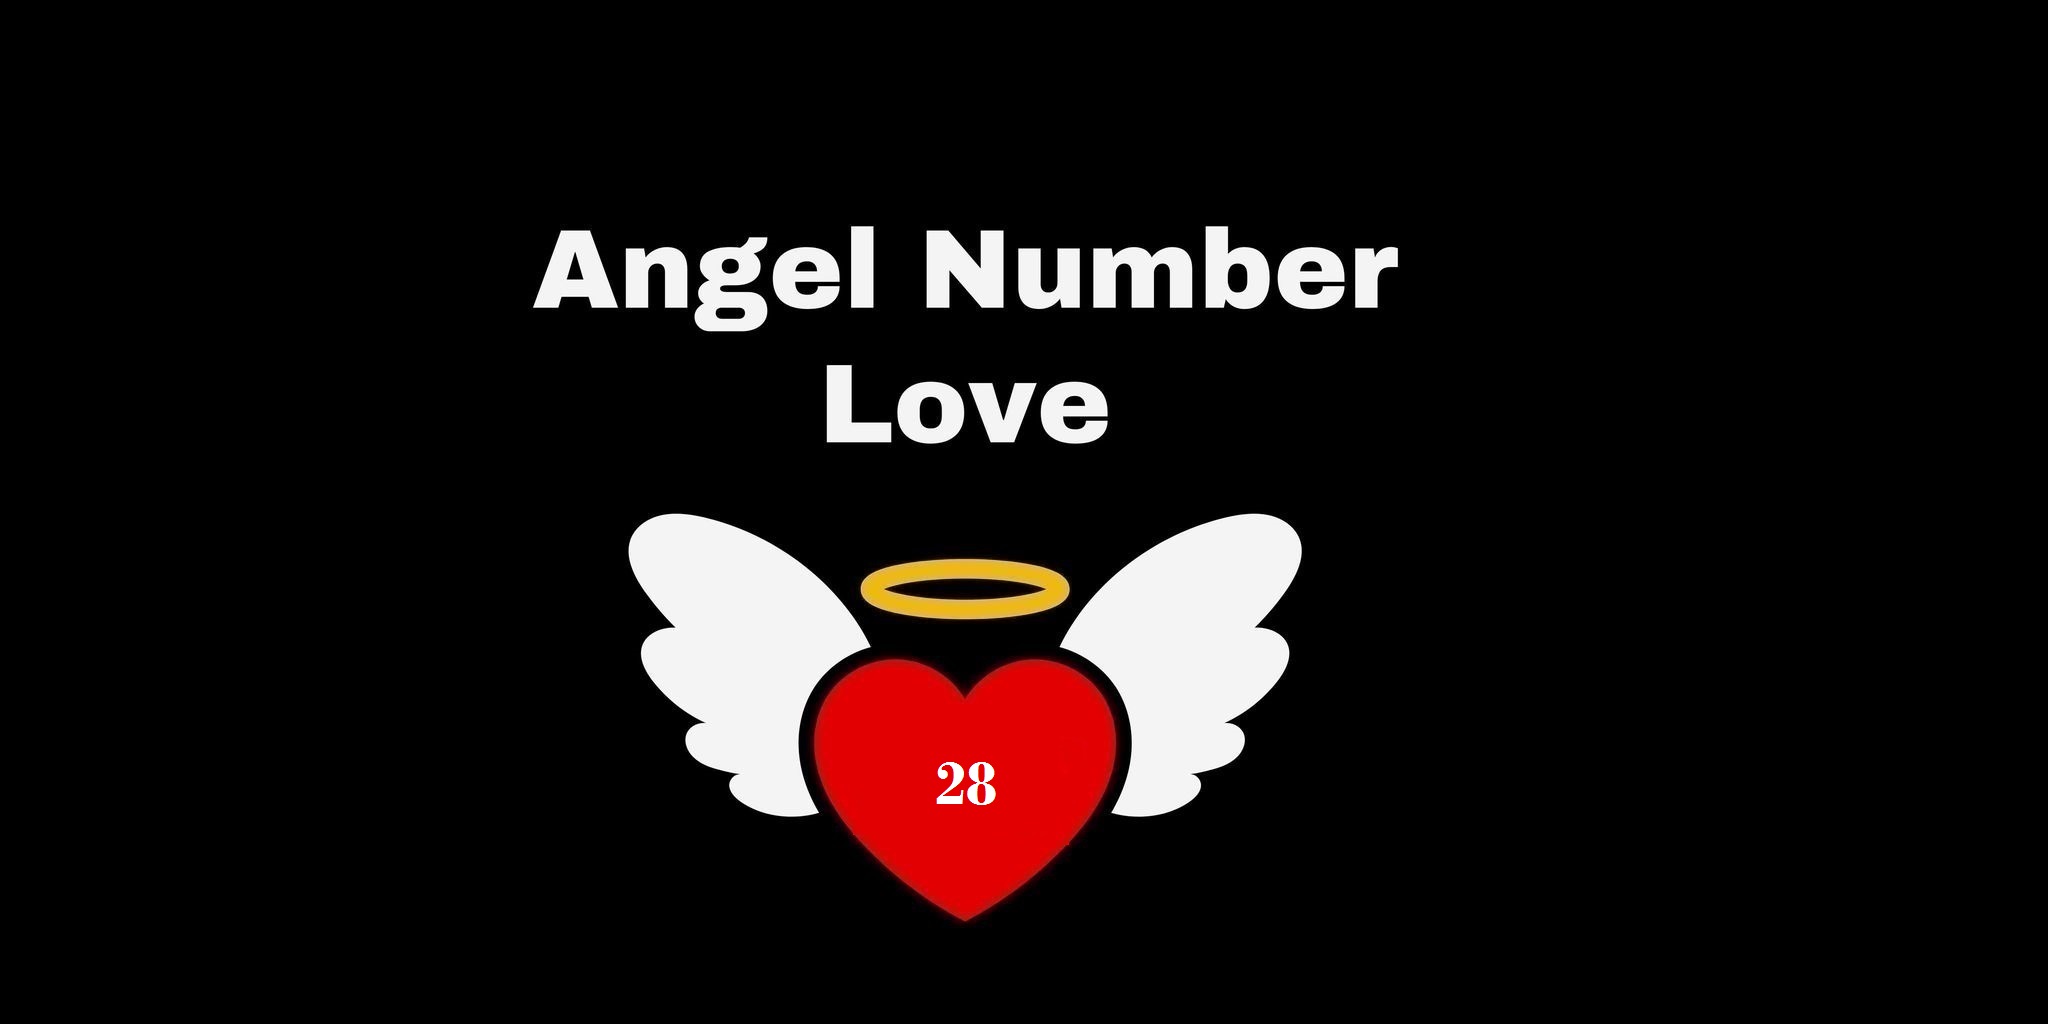 28 Angel Number Meaning In Love